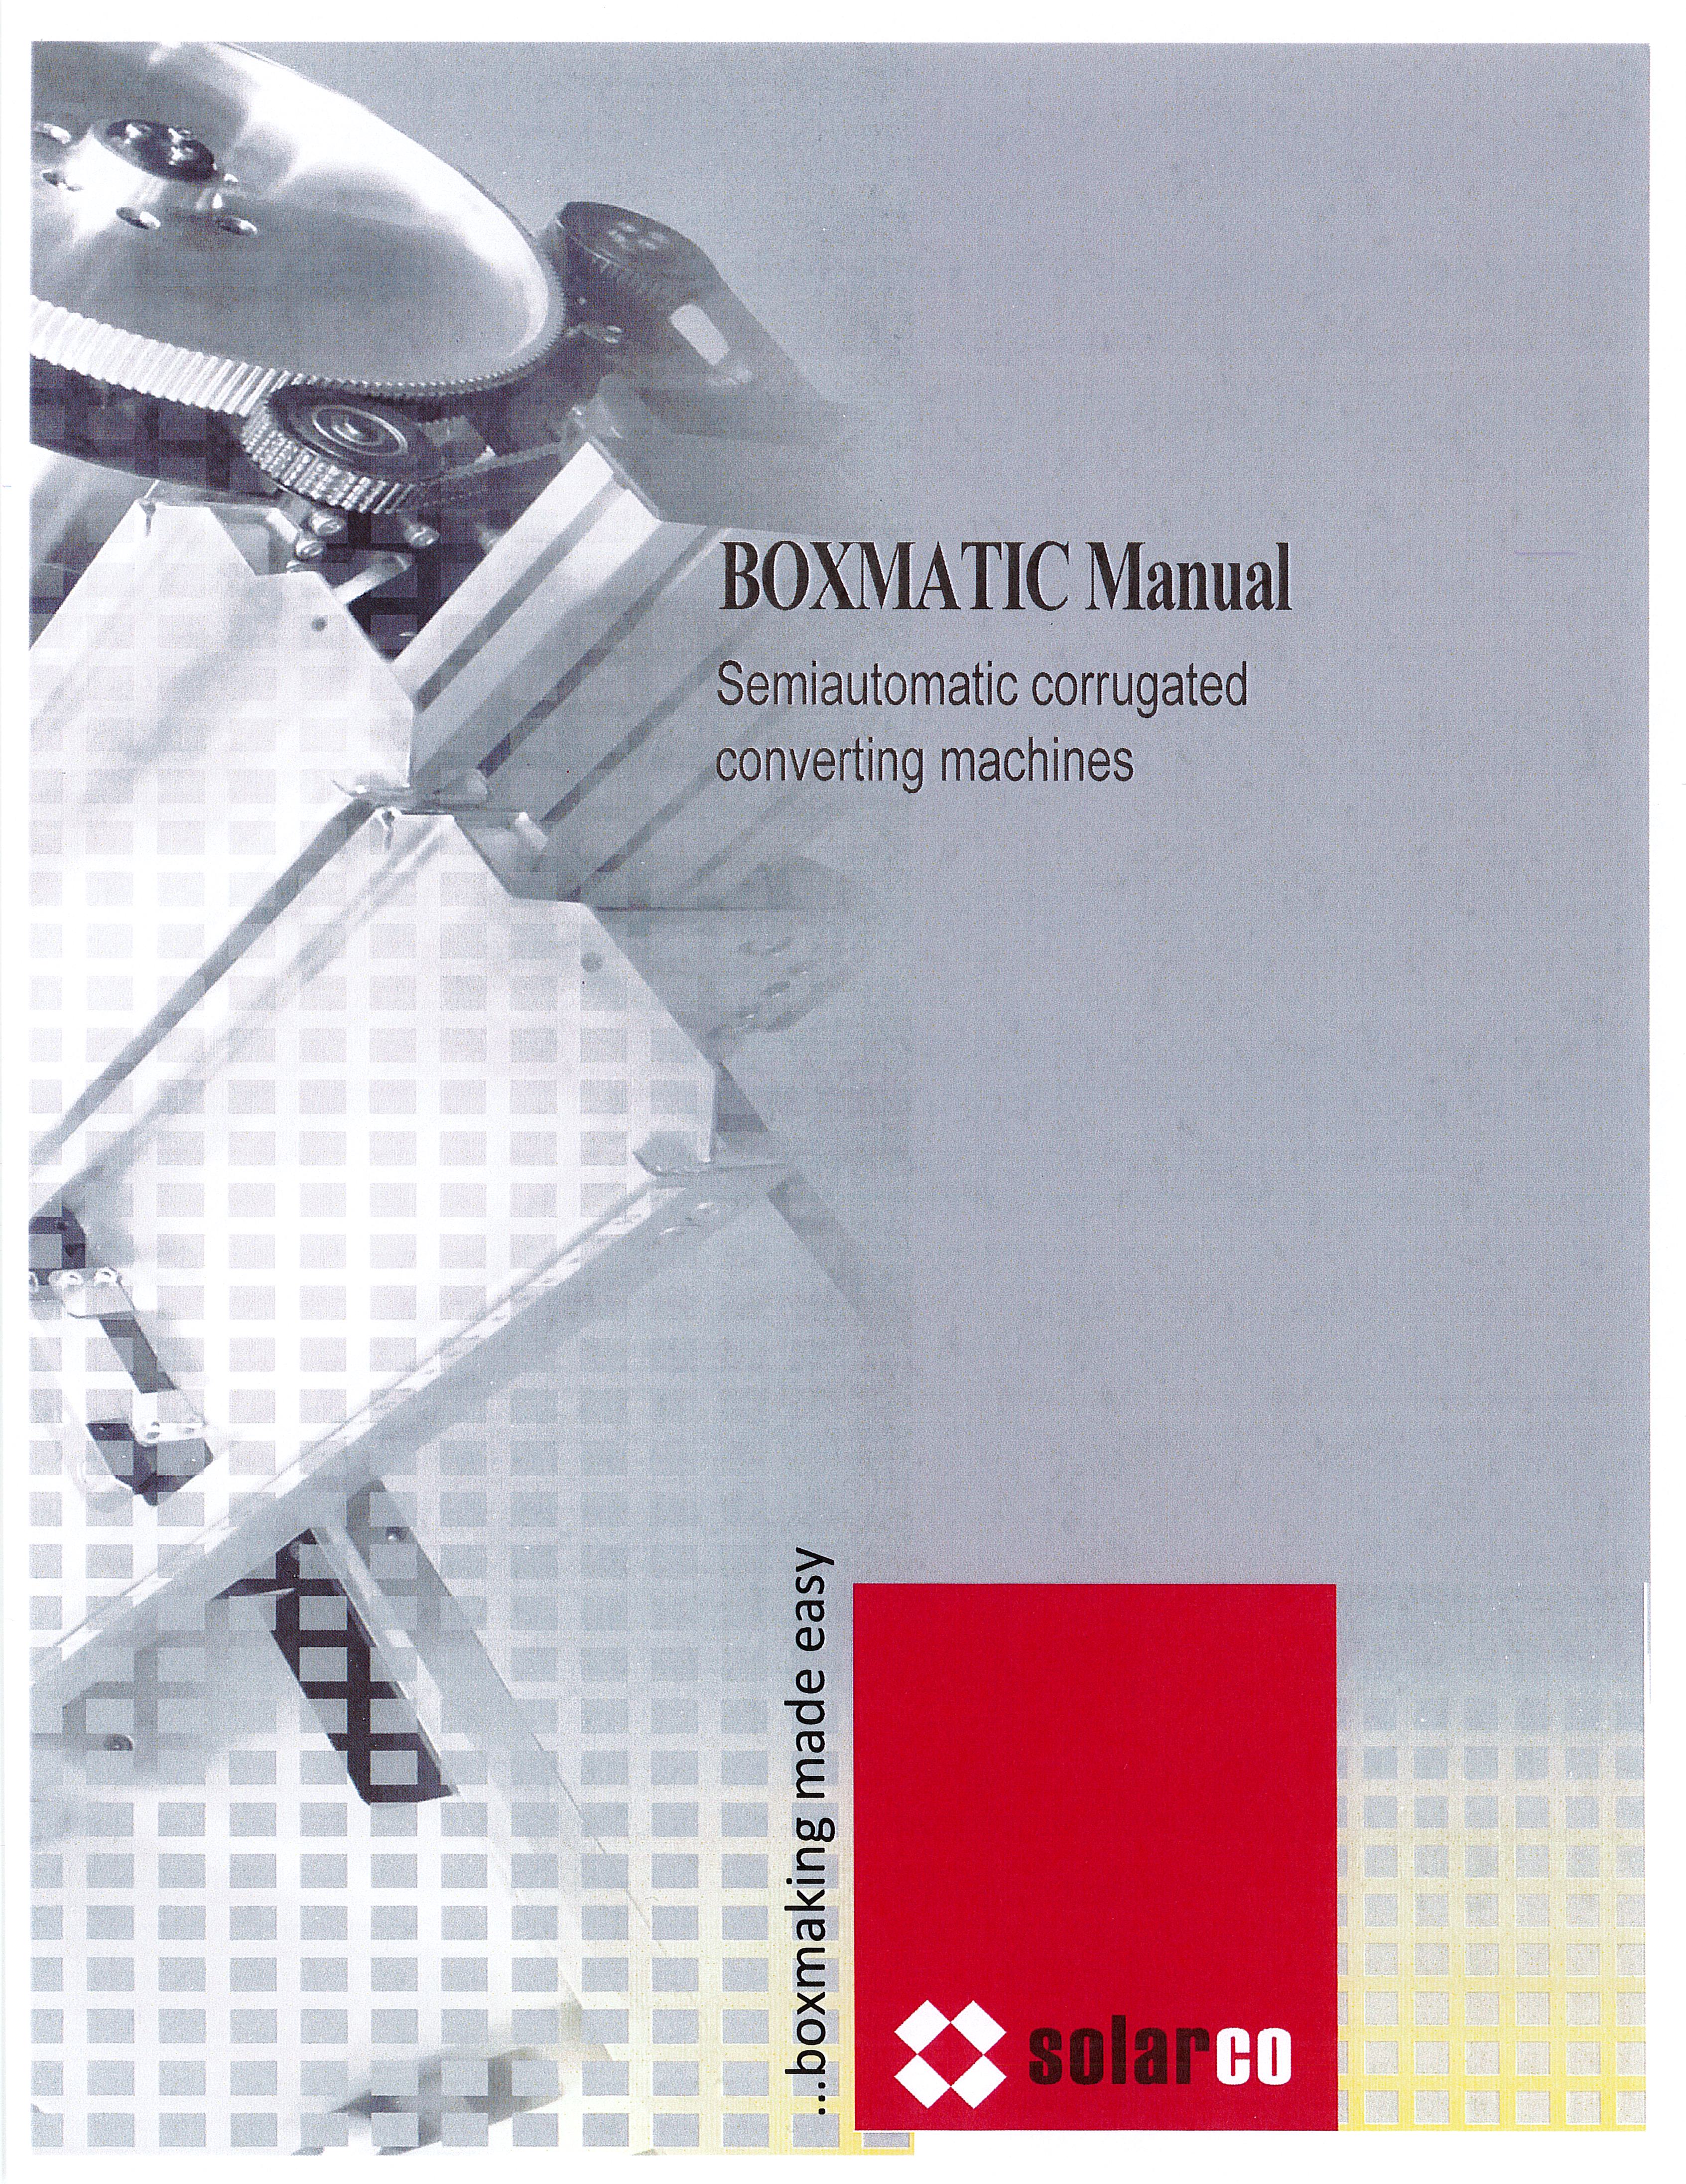 Learn more in the Solarco BOXMATIC Manual brochure